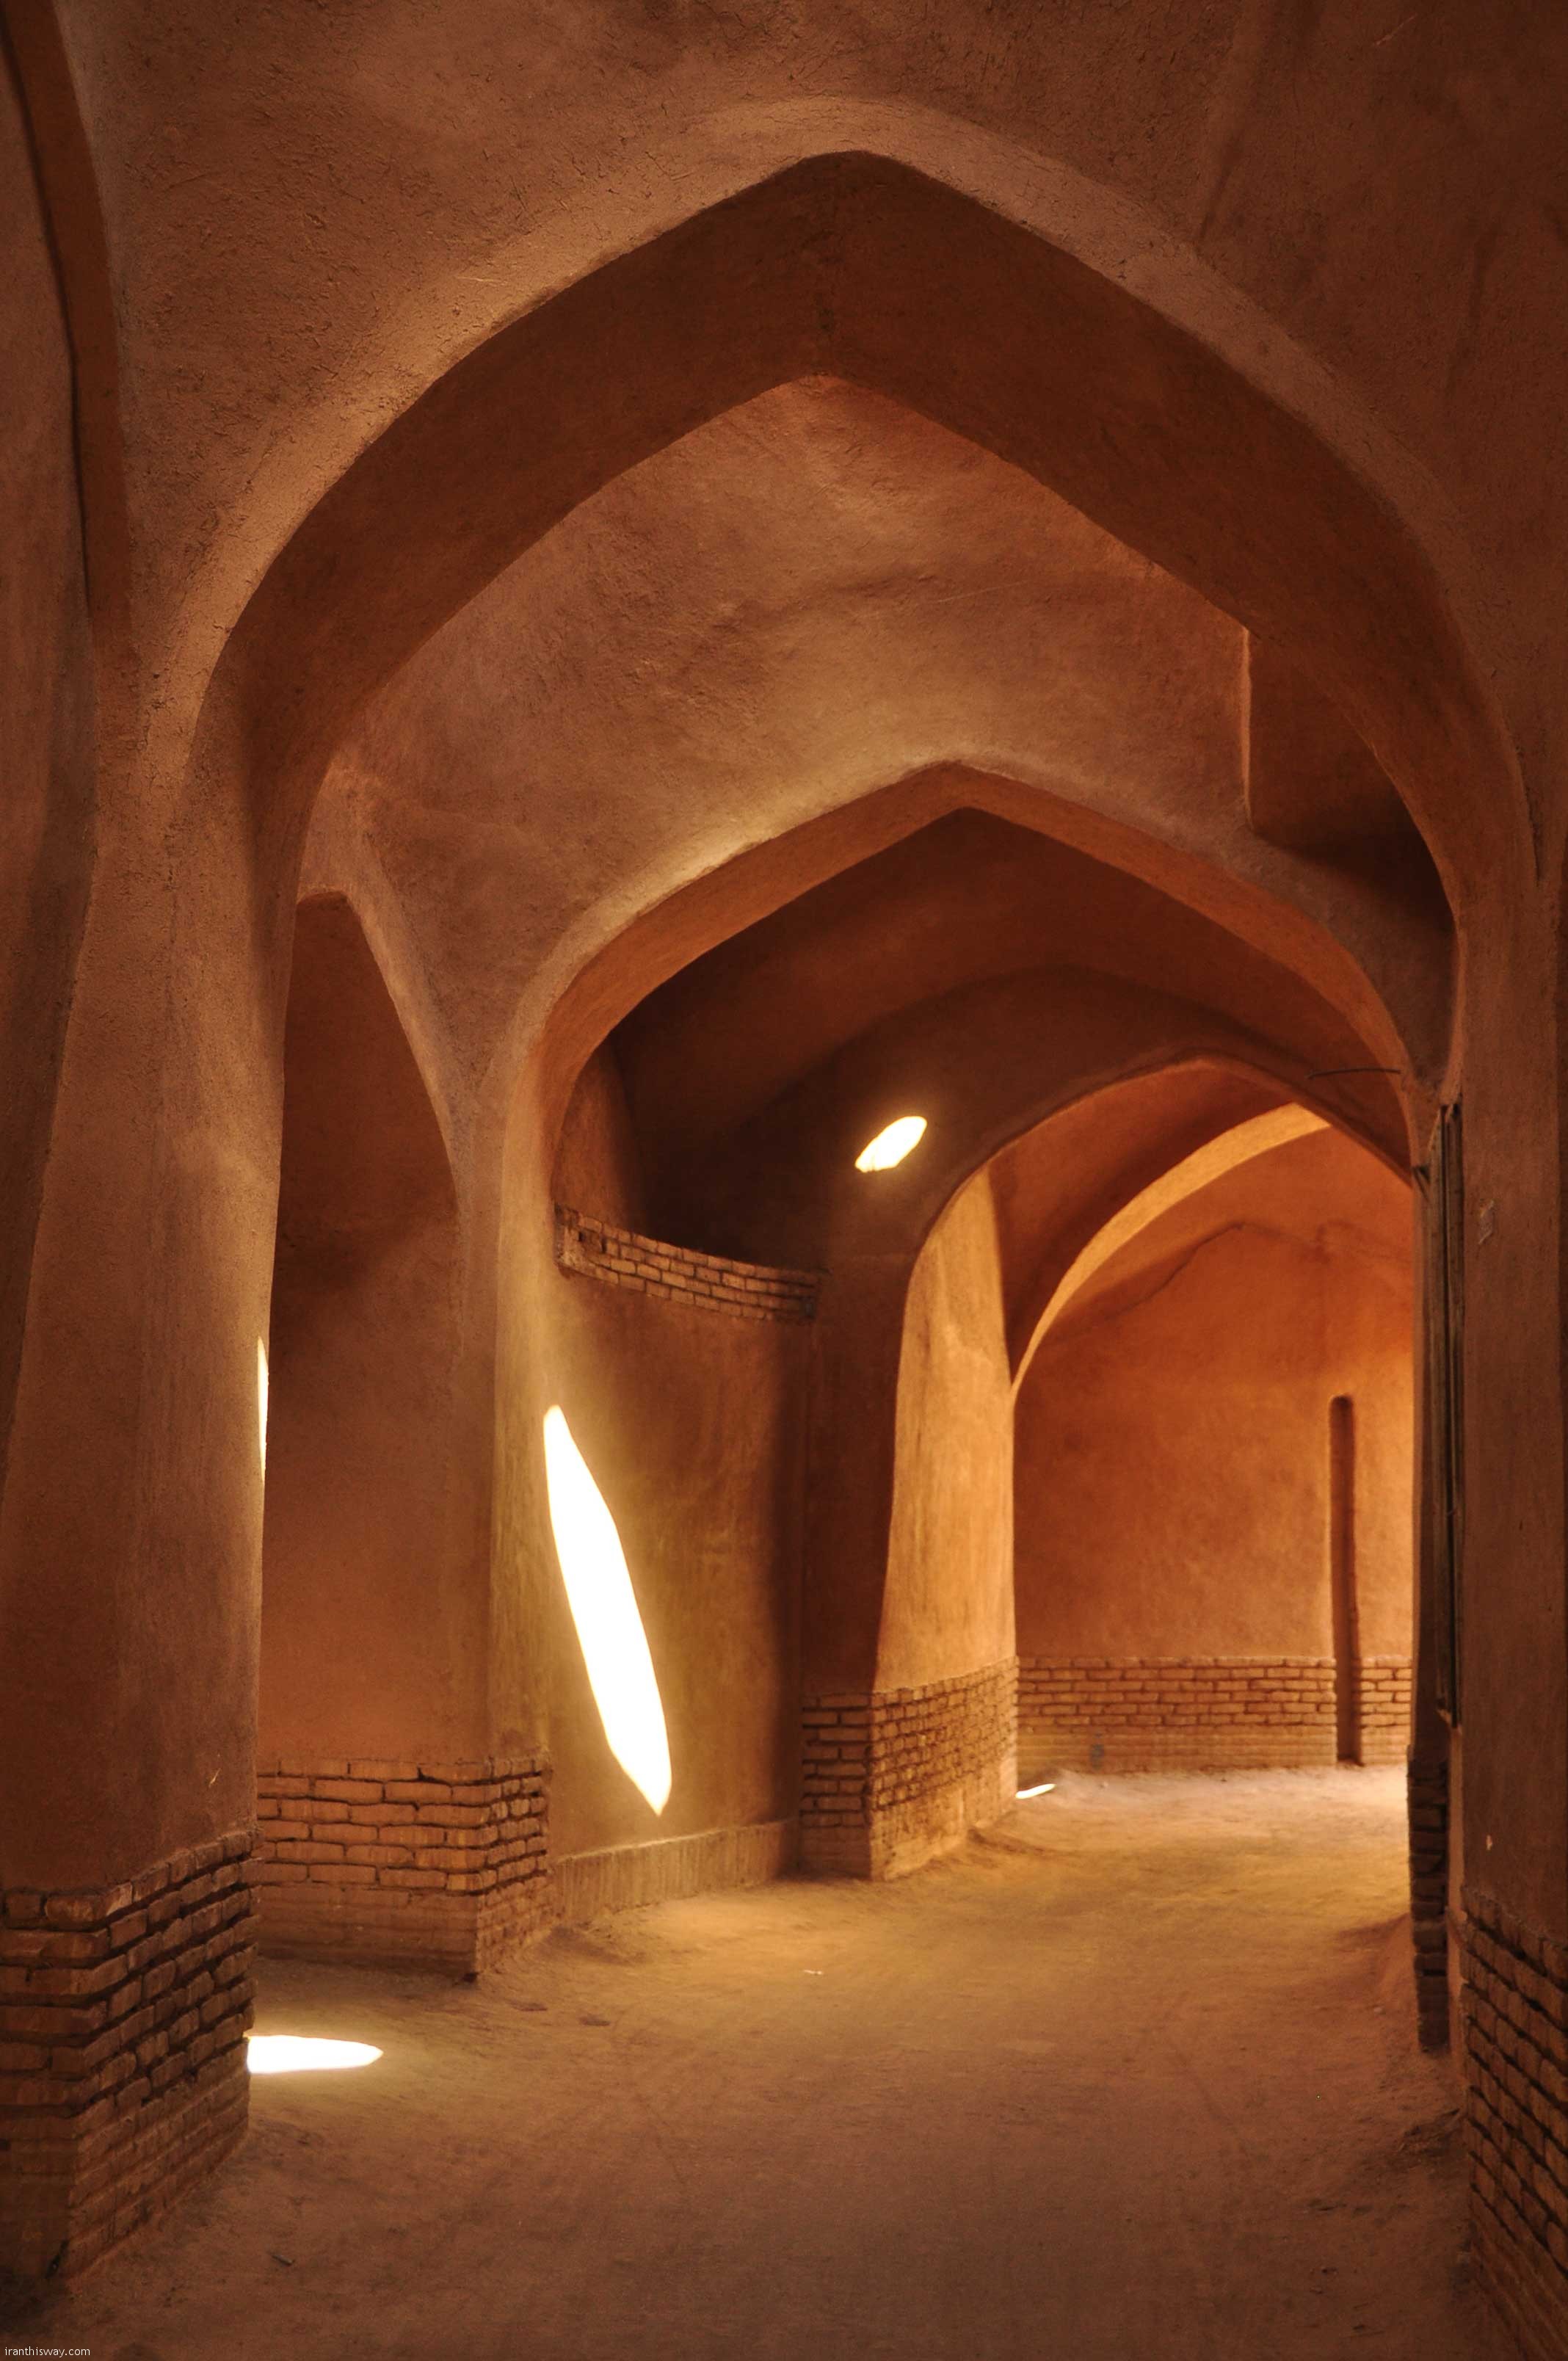 The capital of Yazd province has a unique Persian architecture. The historical city is nicknamed the city of wind catchers because of its ancient Persian wind catchers.